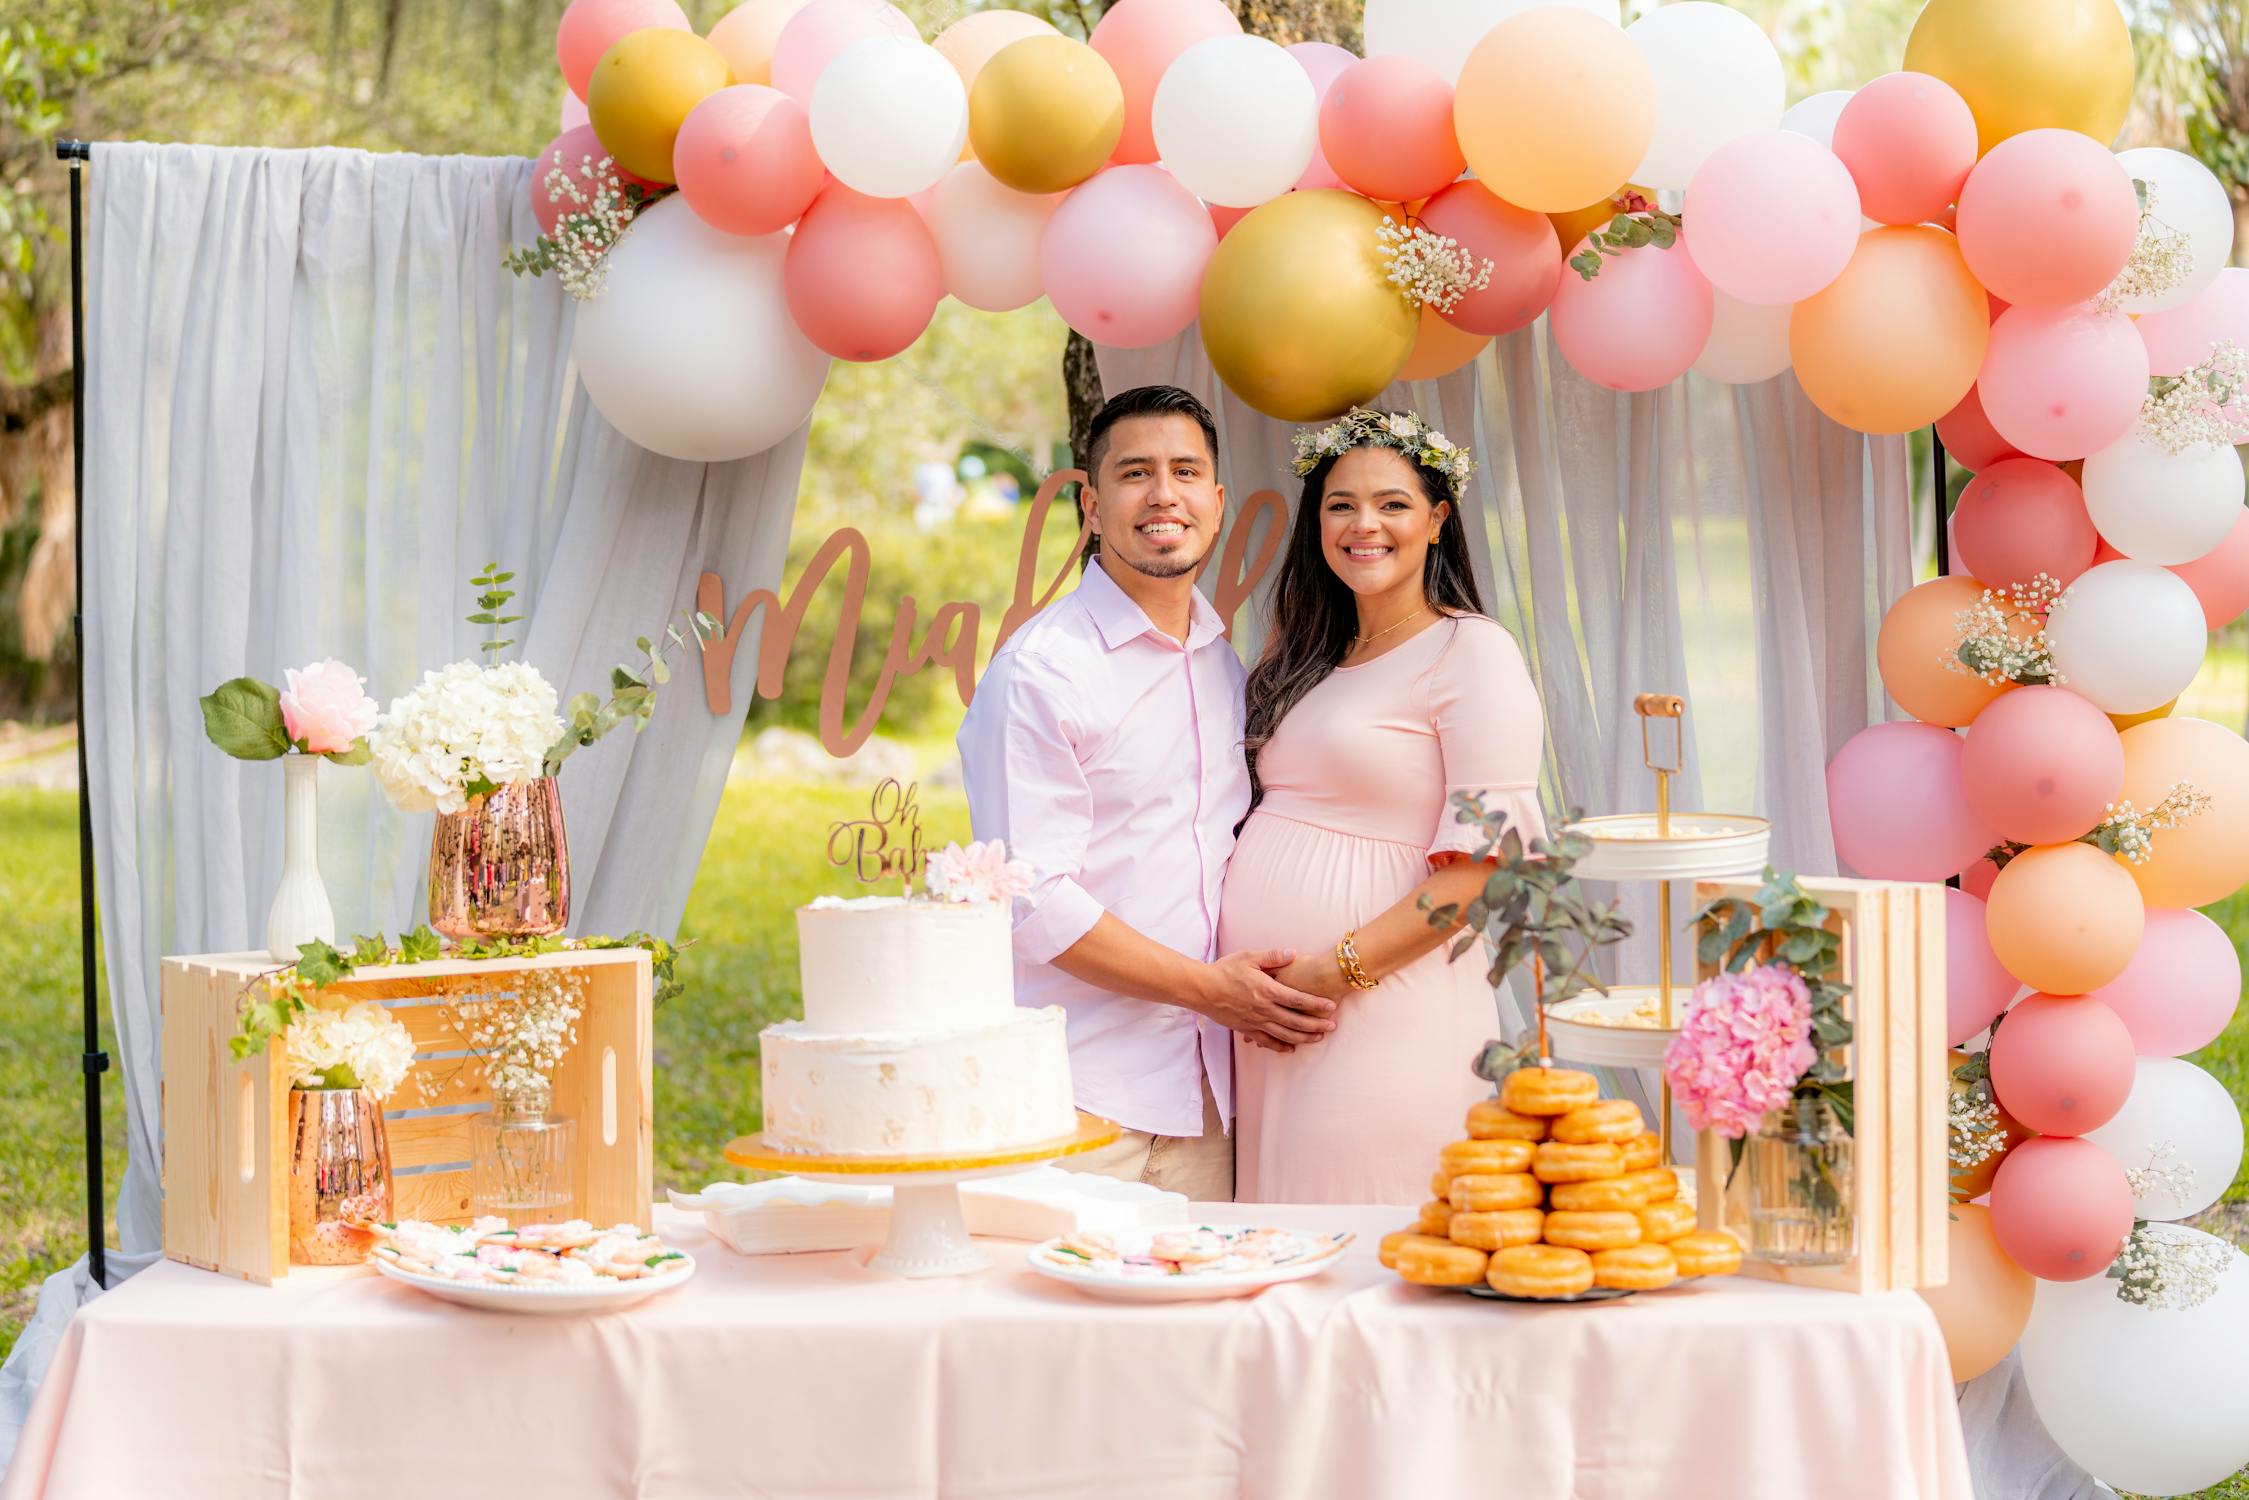 How to Plan an Incredible Baby Shower